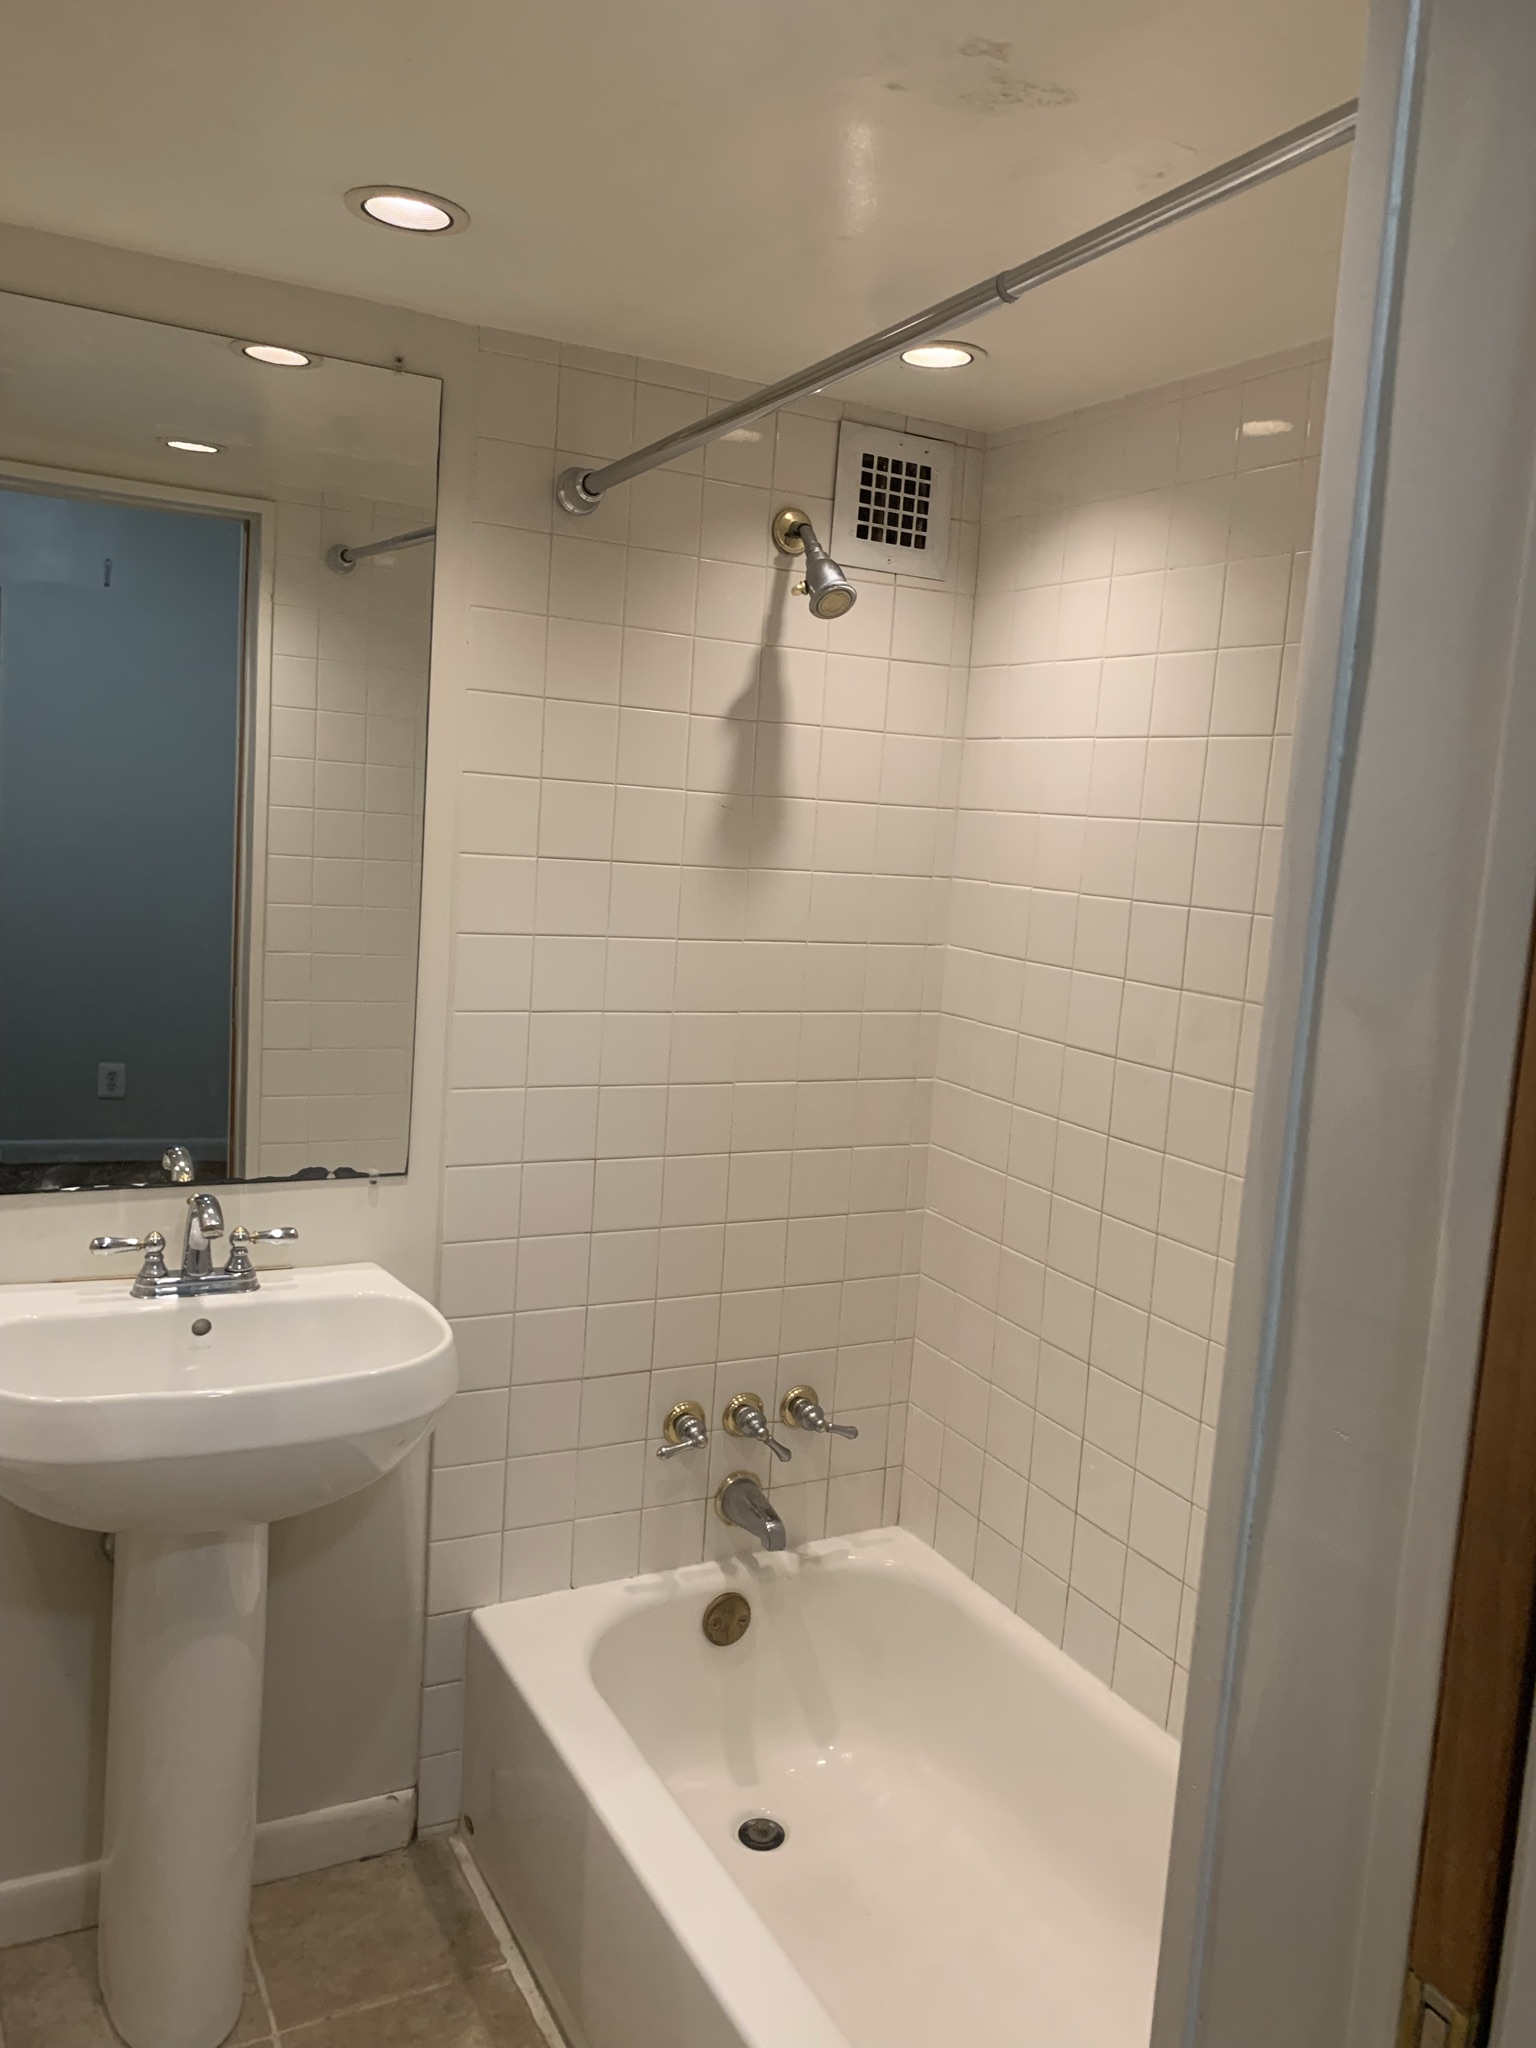 Dupont Circle Studio. All Utilities Included! – 1260 21st St NW #710